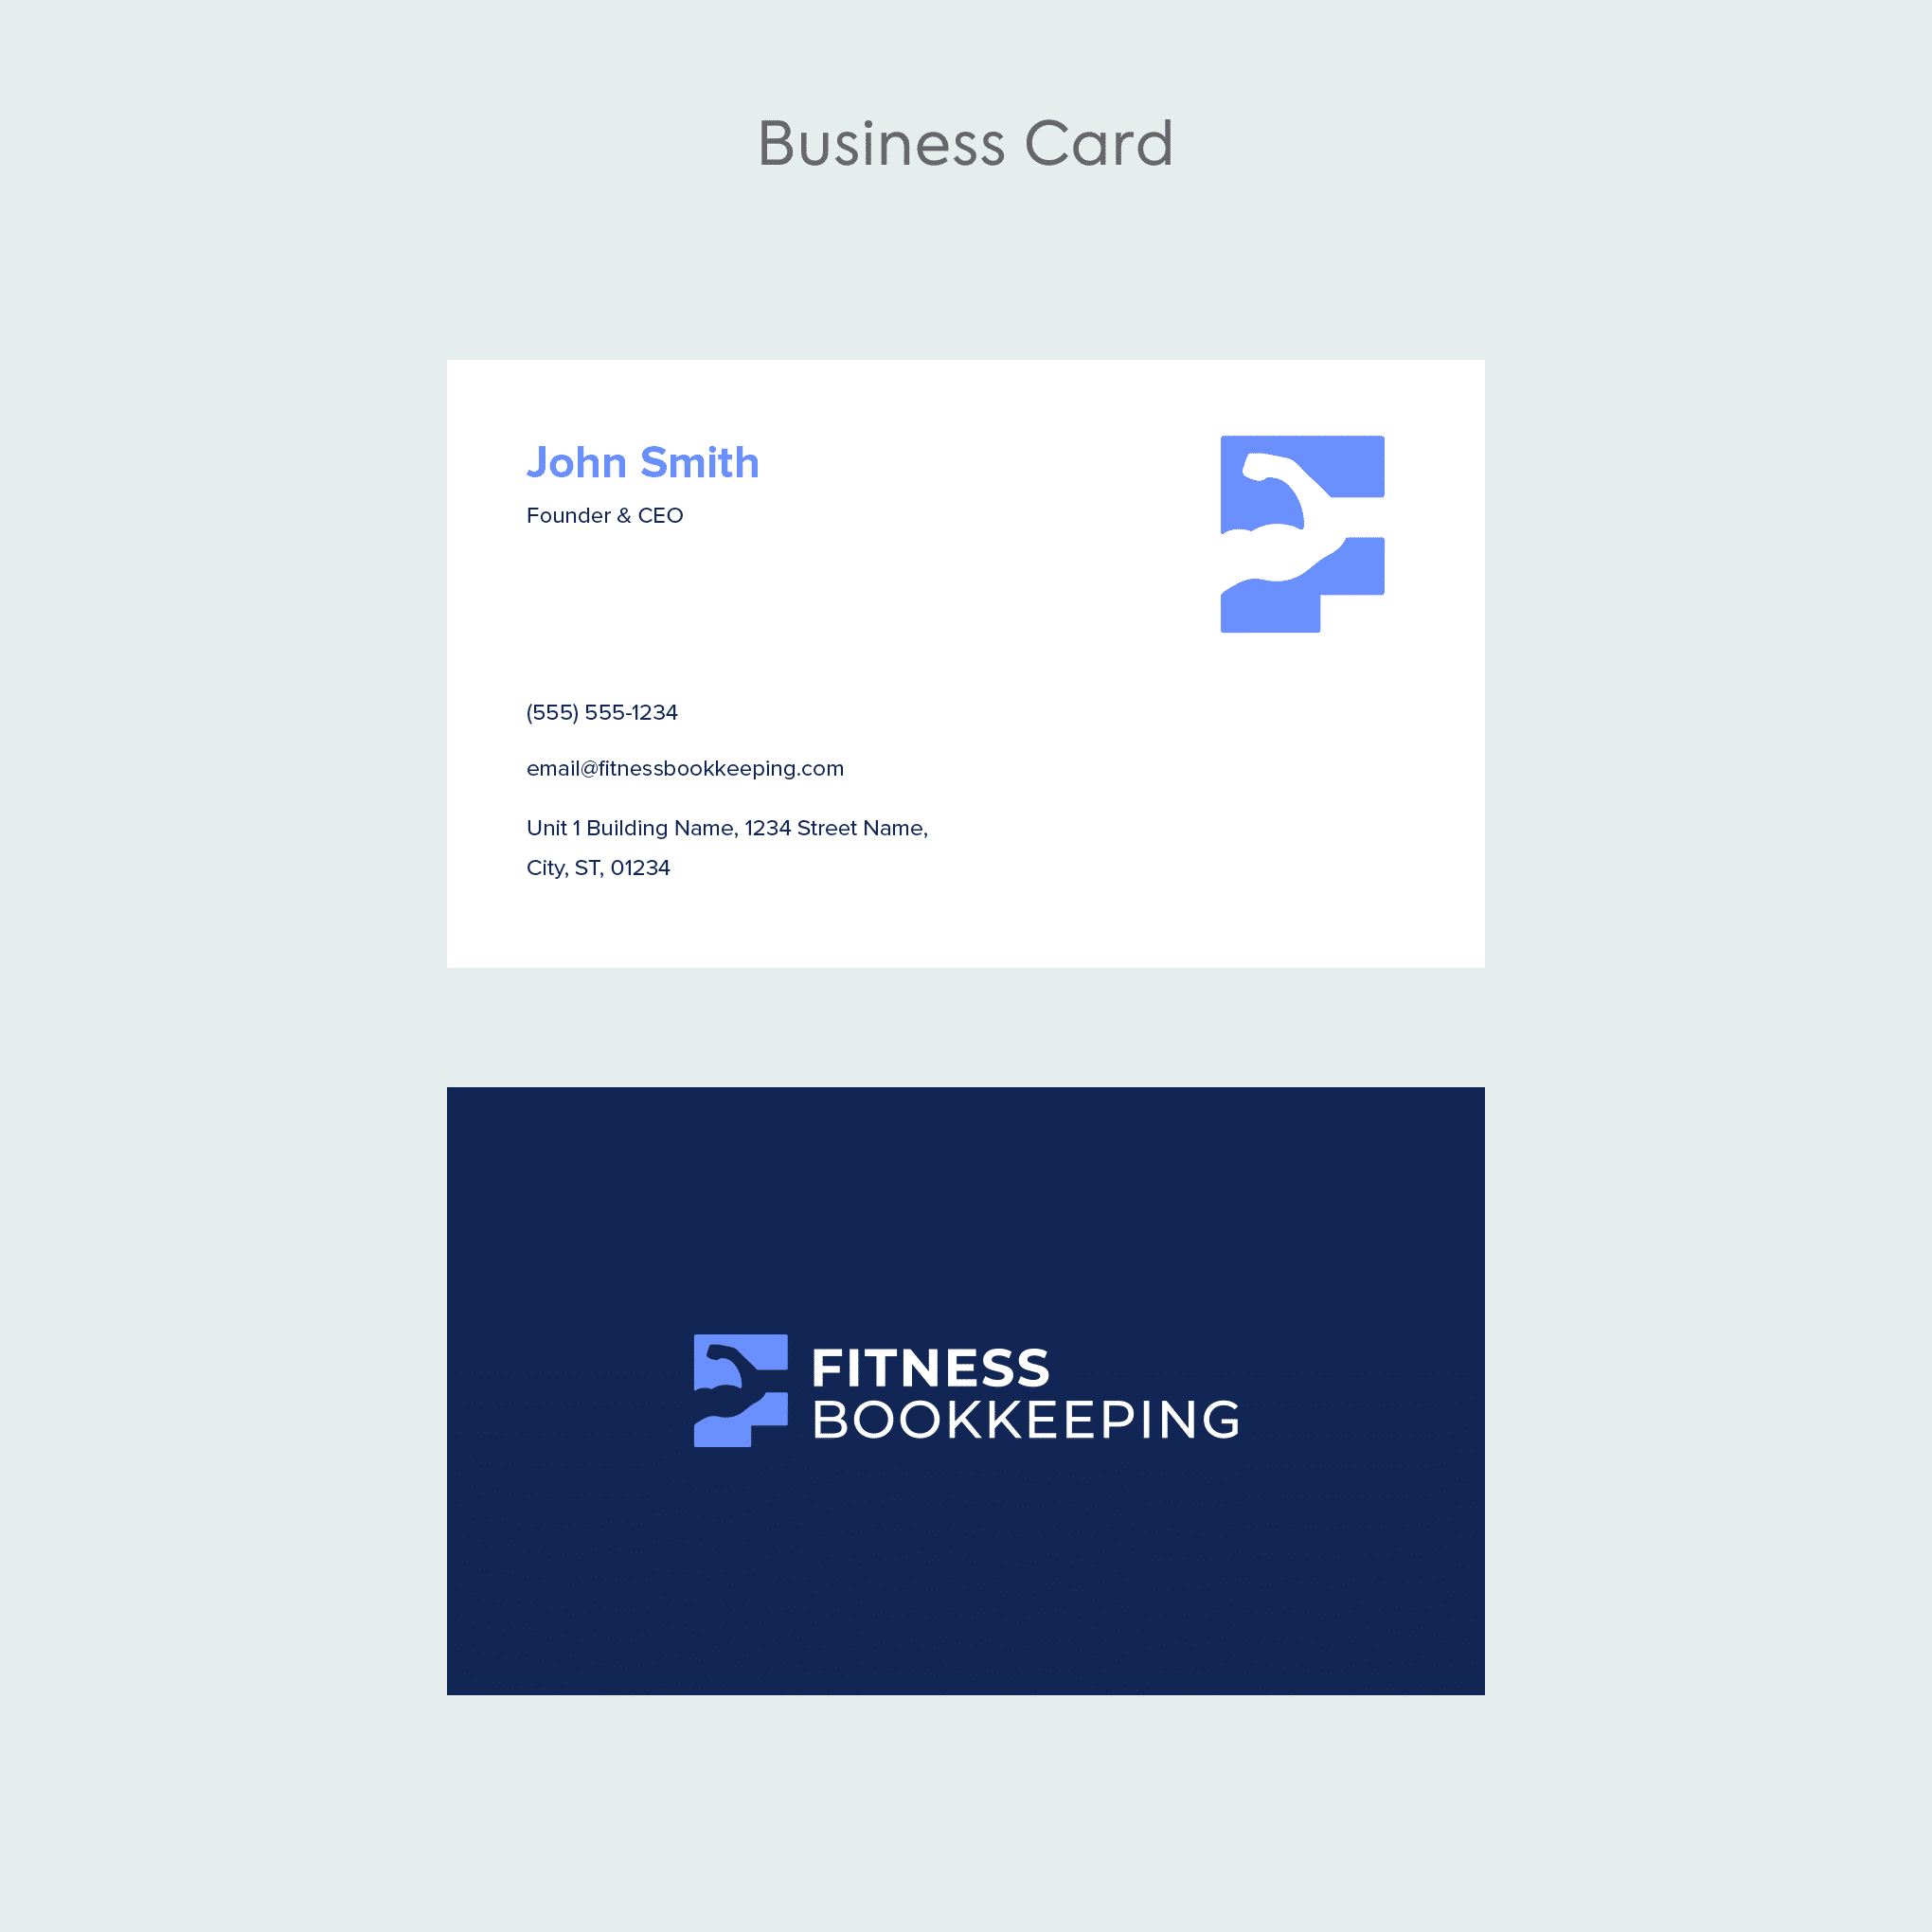 04 - Business Card Template (6)